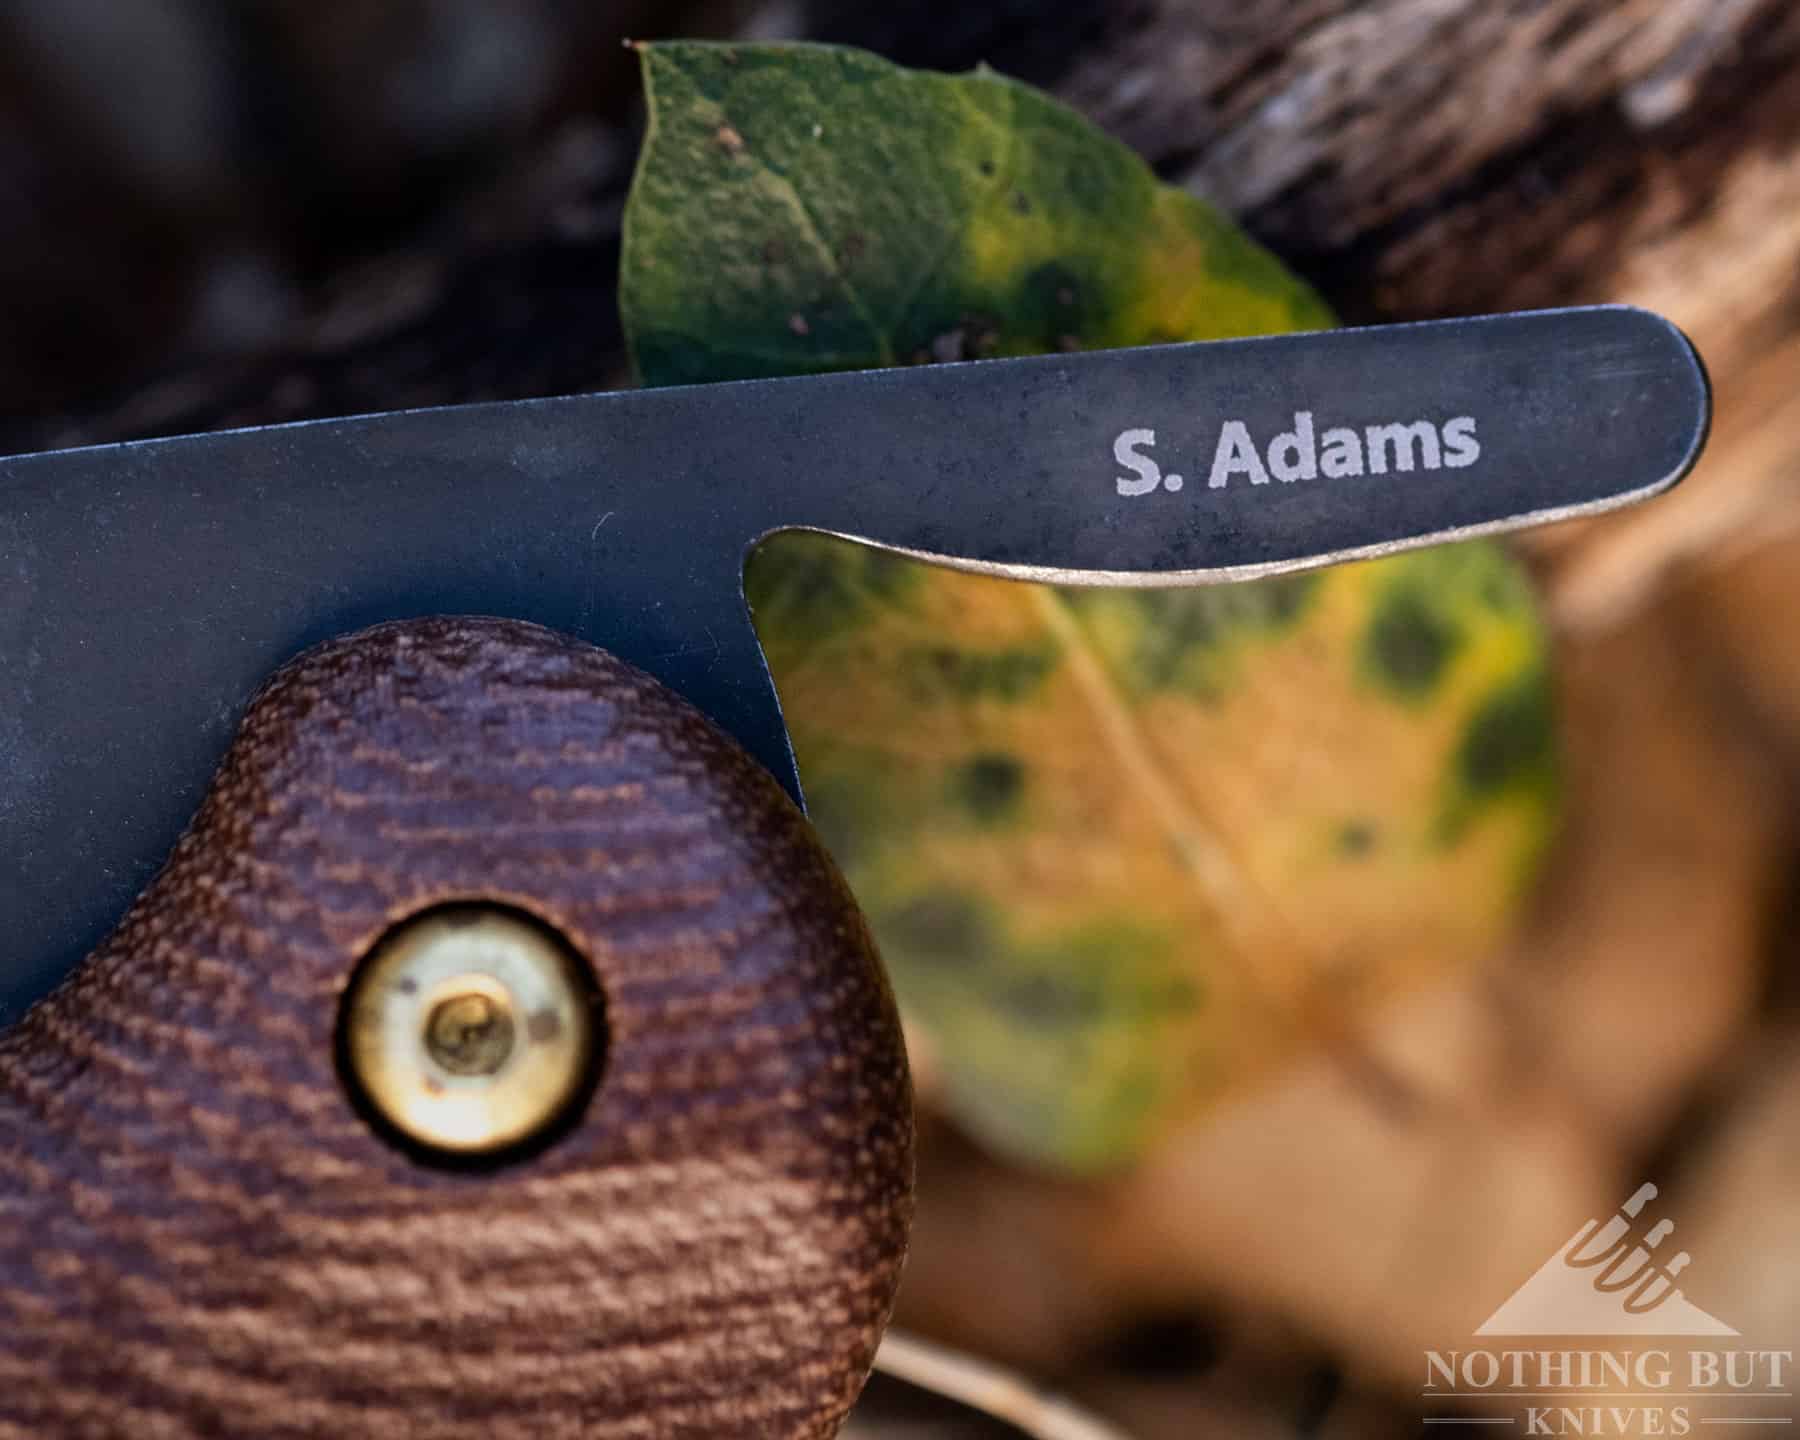 Shane Adams spent years designing this friction folder, and his first initial and last name are stamped on the back of the blade tang.